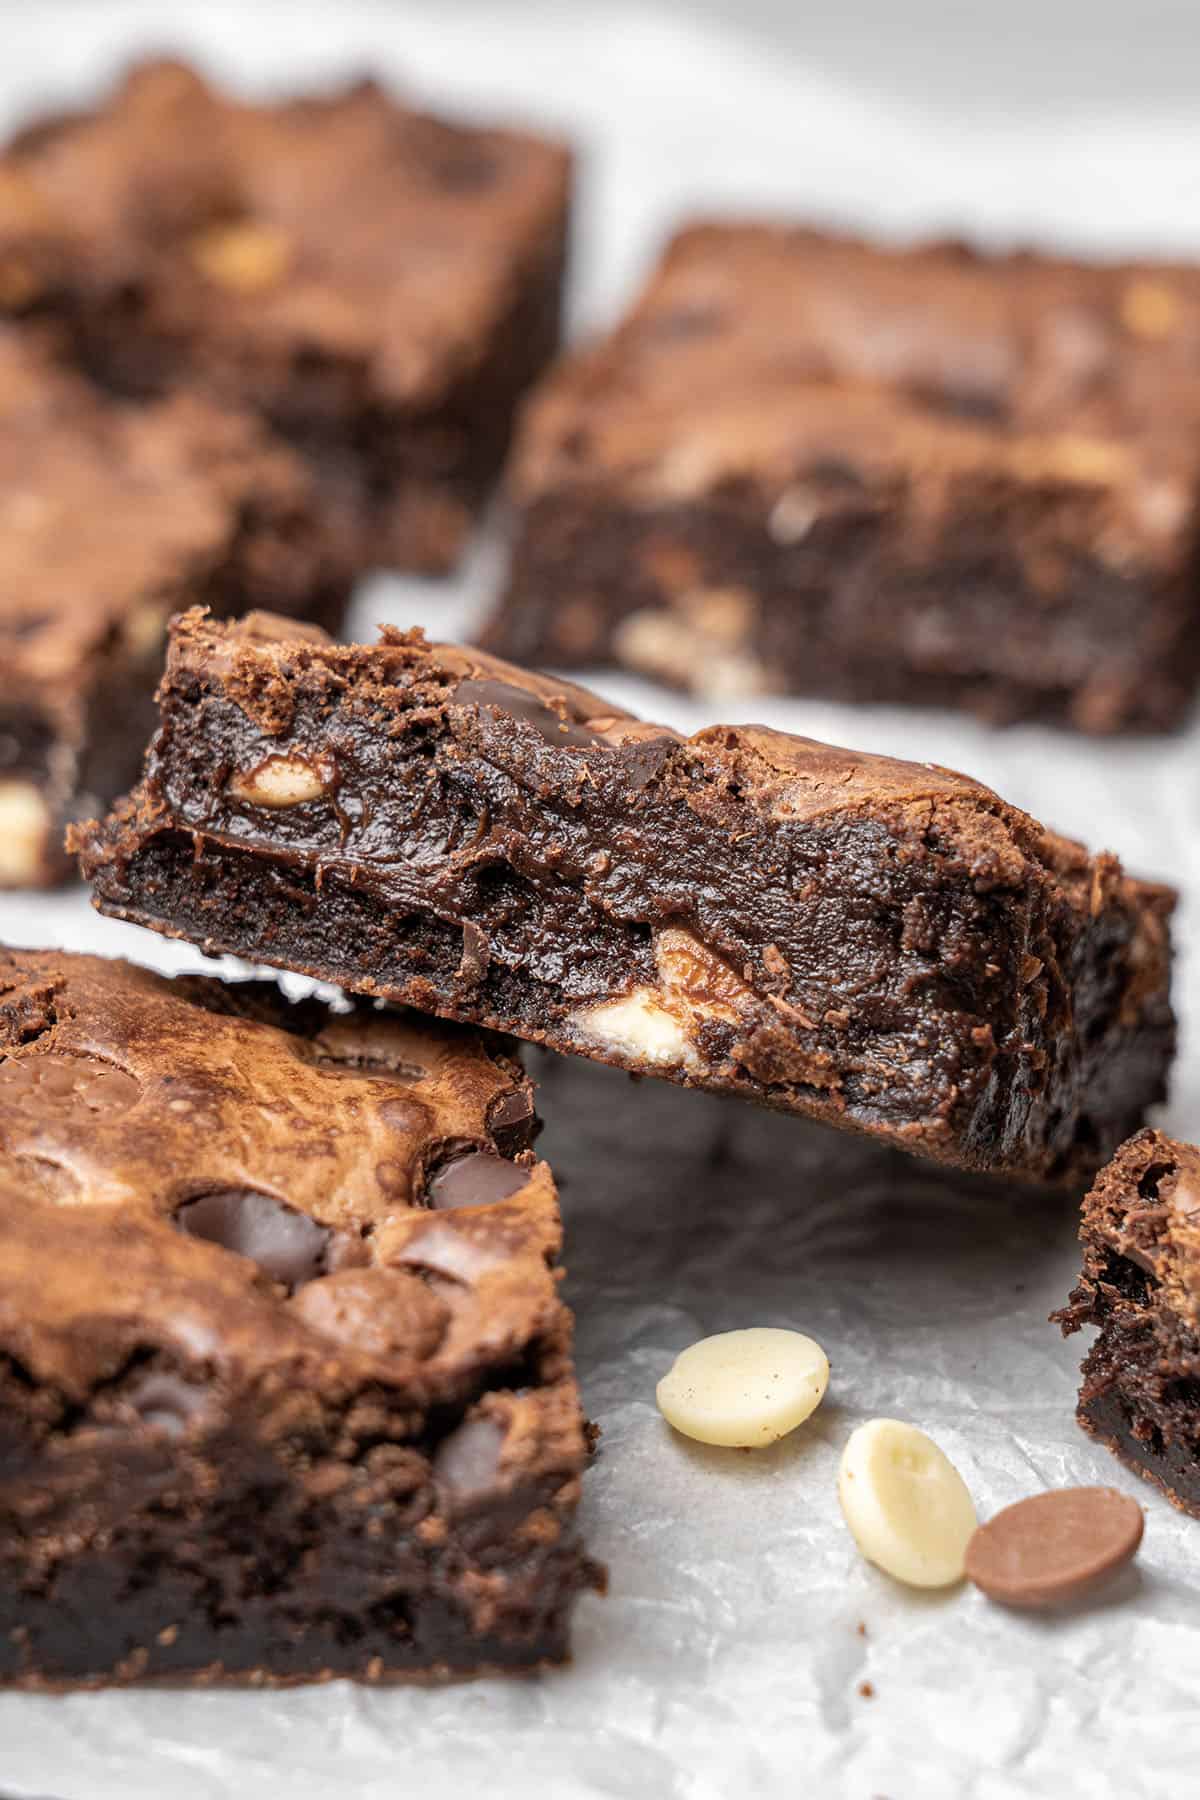 Triple chocolate brownies on a baking paper.